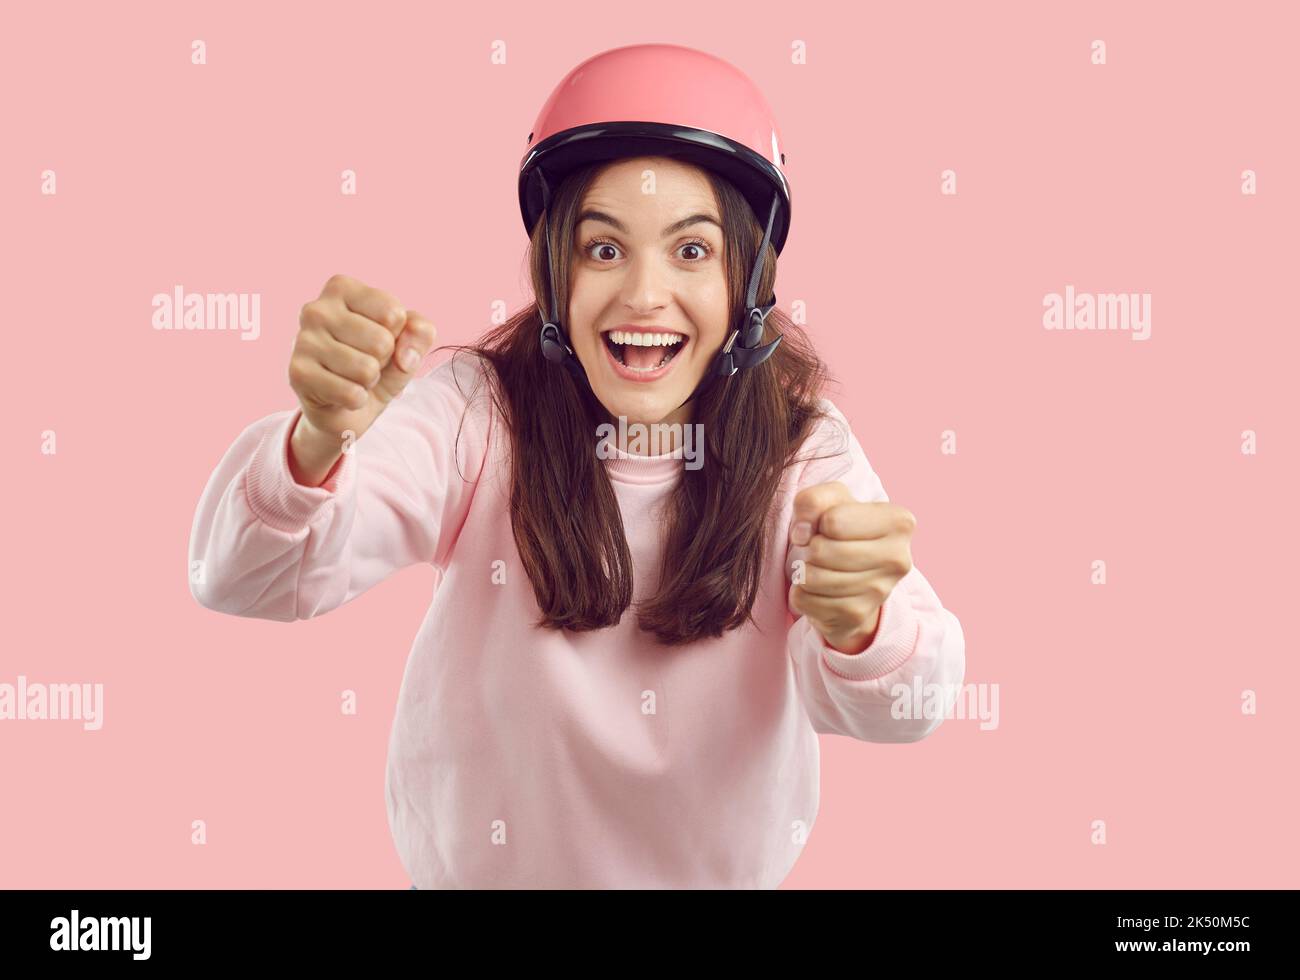 Funny happy excited young woman in pink helmet pretending to drive invisible car Stock Photo